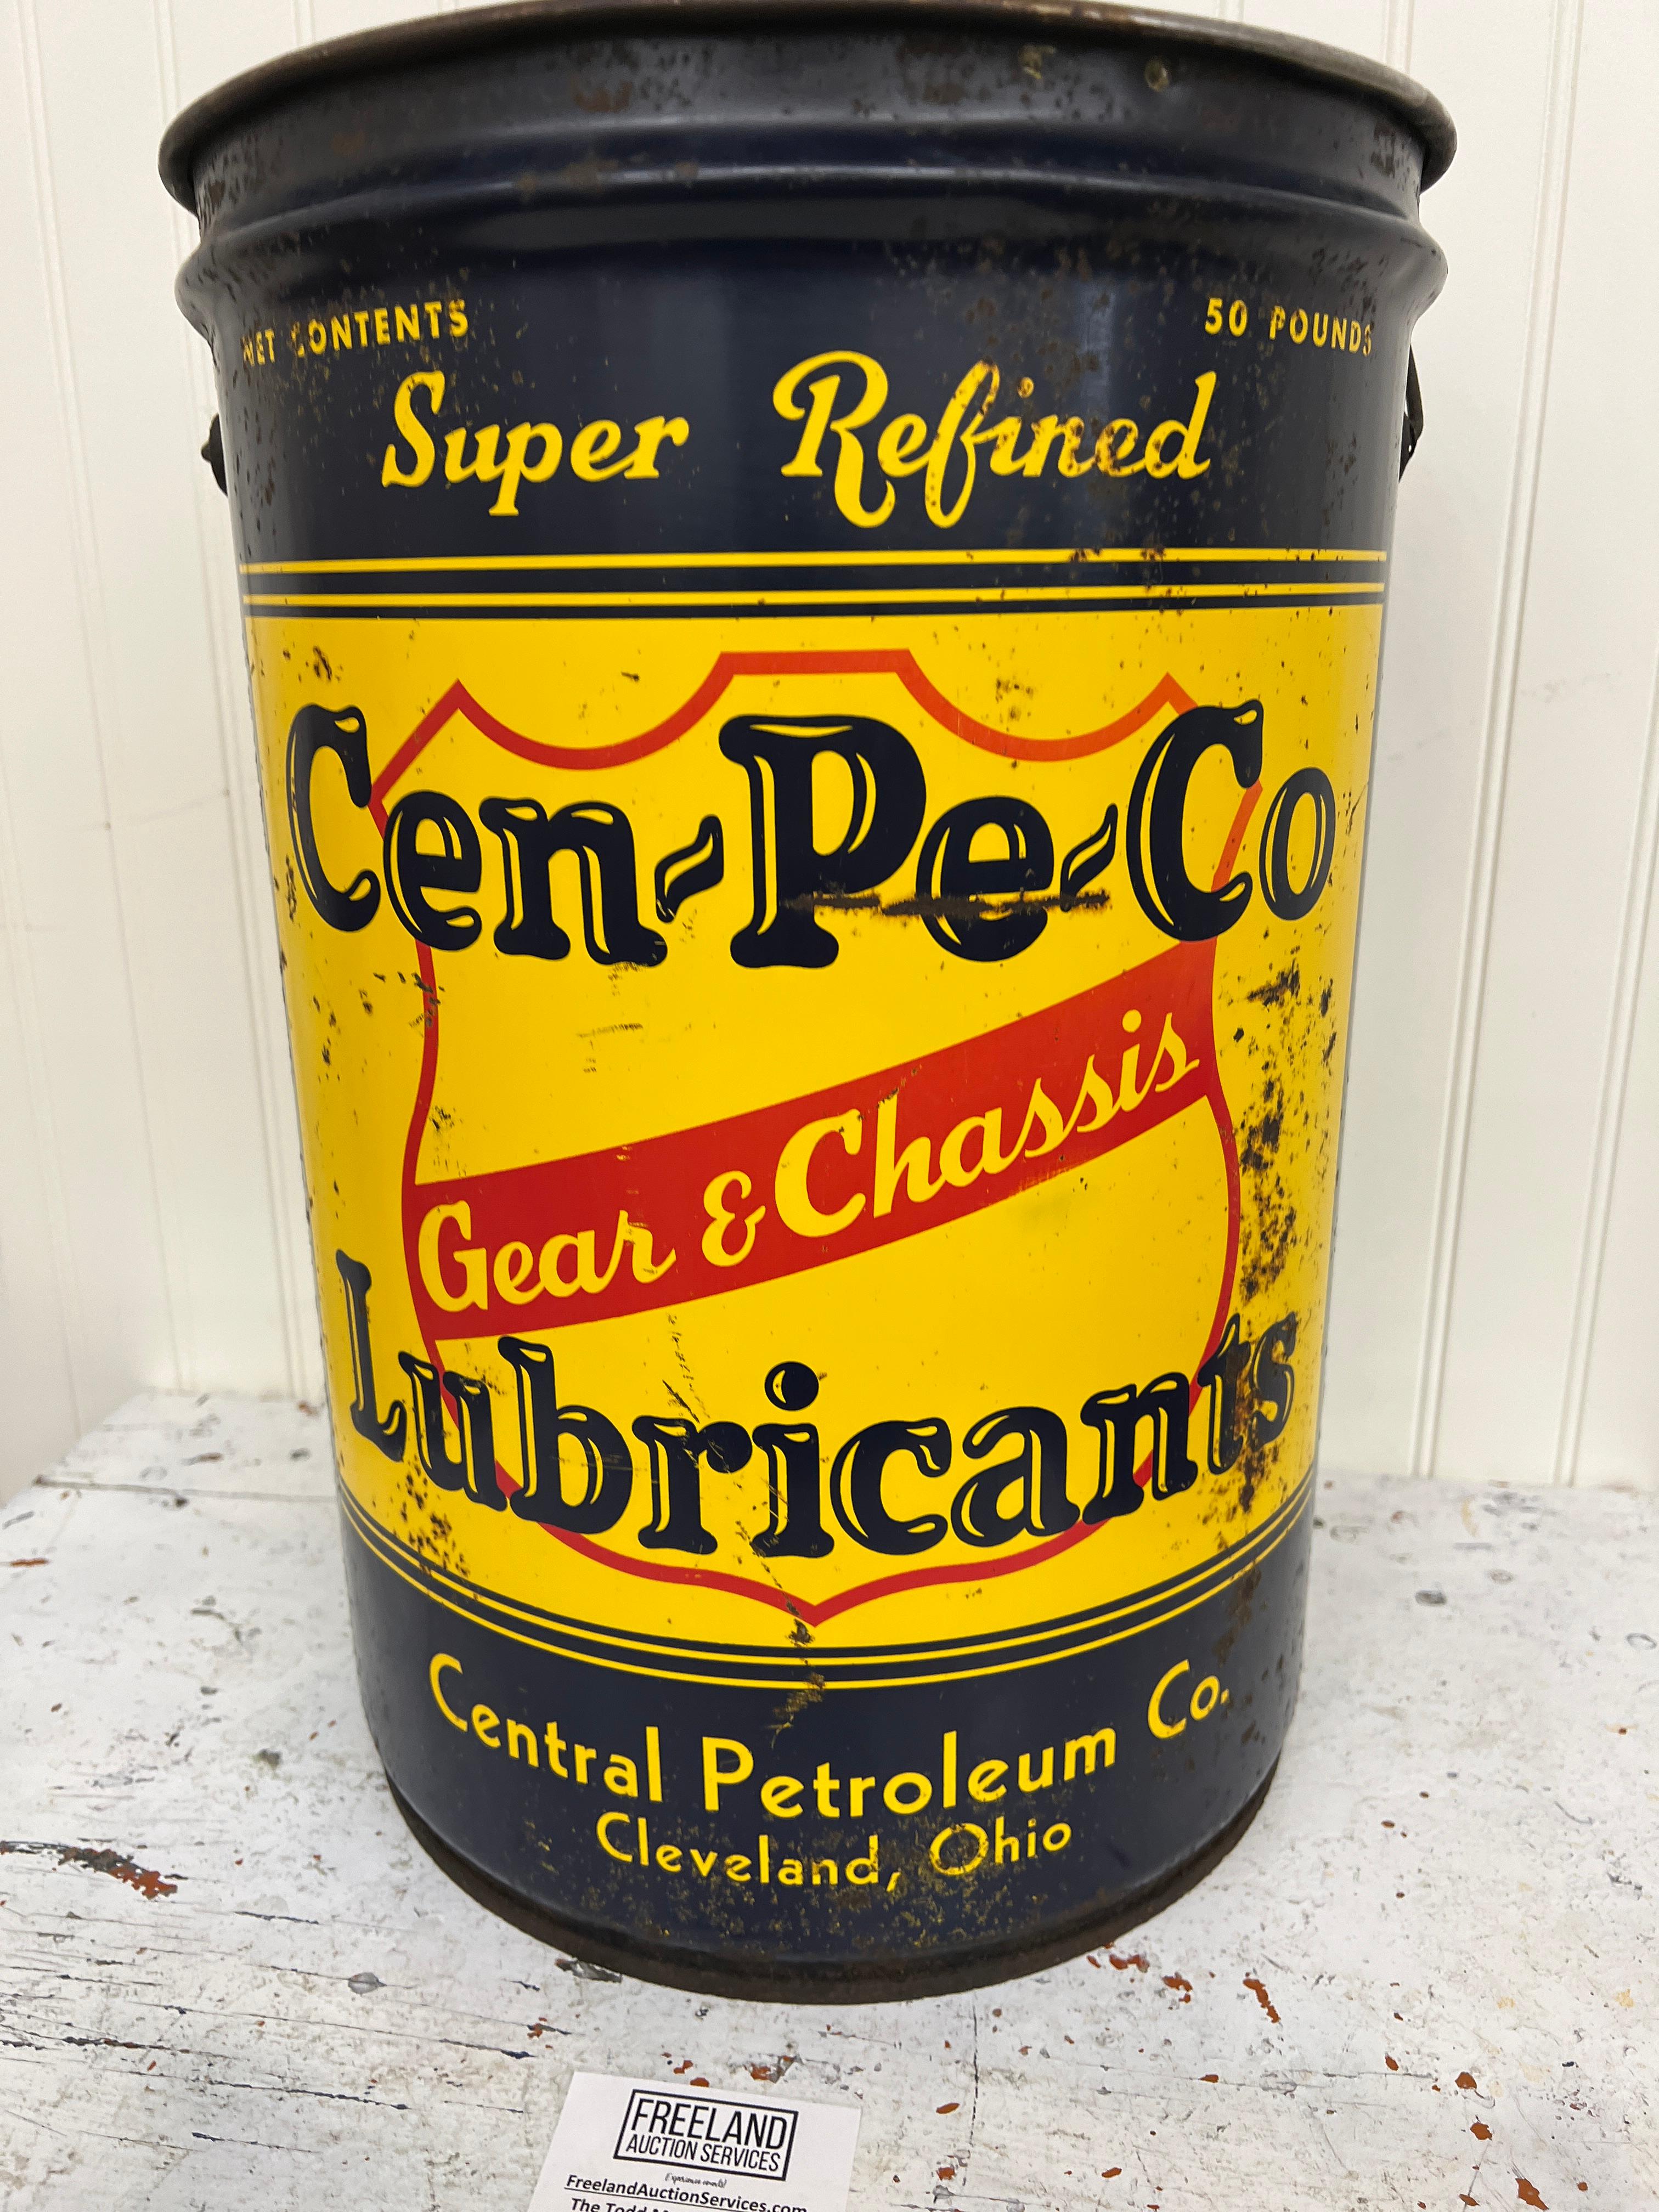 Cen-Pe-Co Lubricants GEAR & CHASSIS 50 lbs steel advertising can